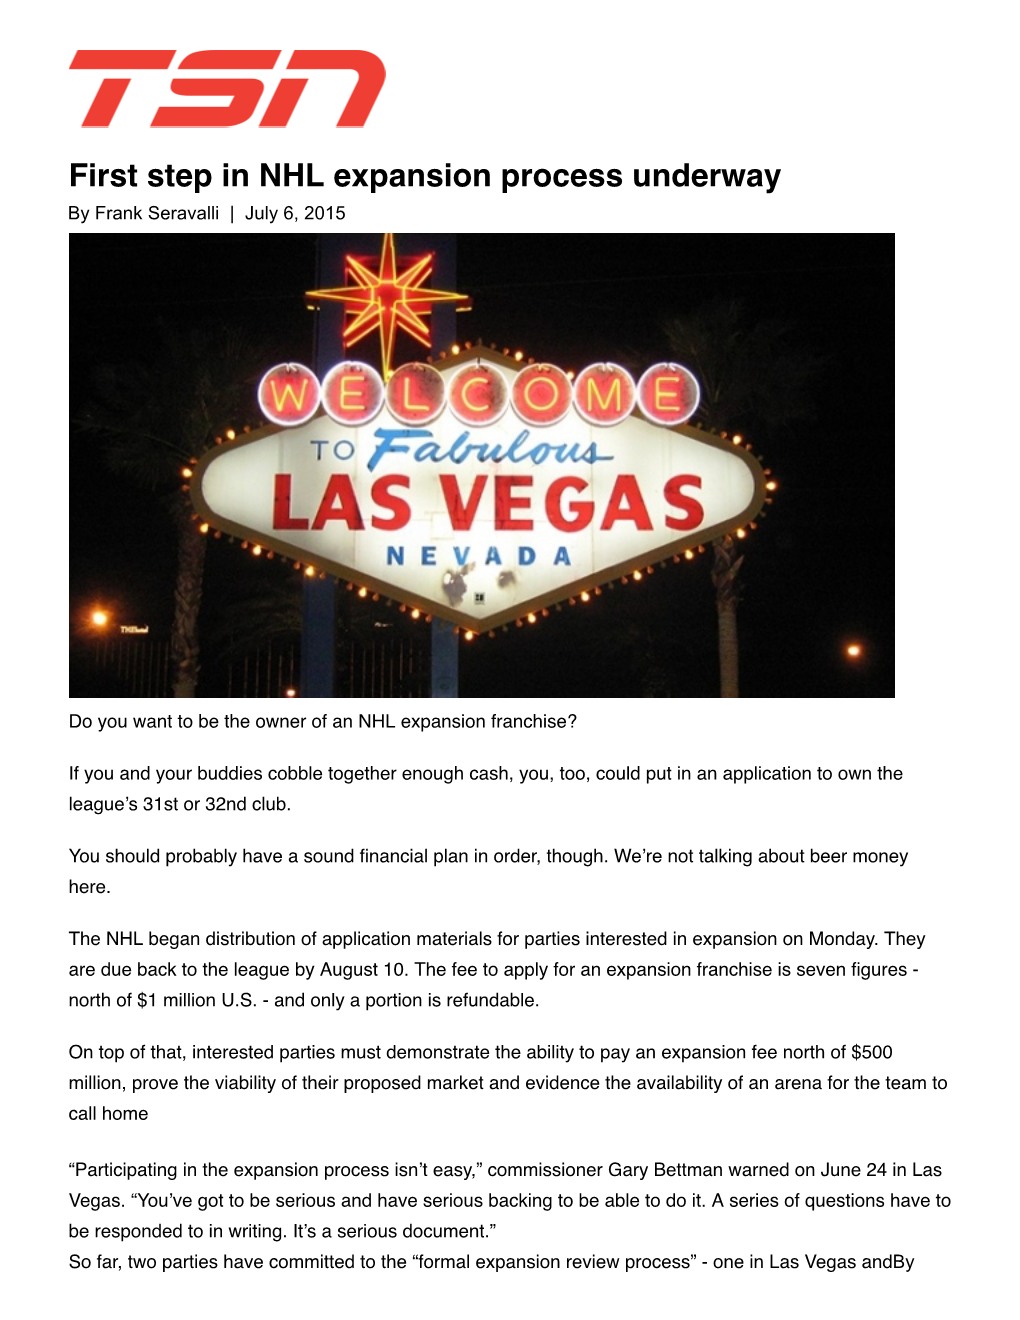 First Step in NHL Expansion Process Underway by Frank Seravalli | July 6, 2015